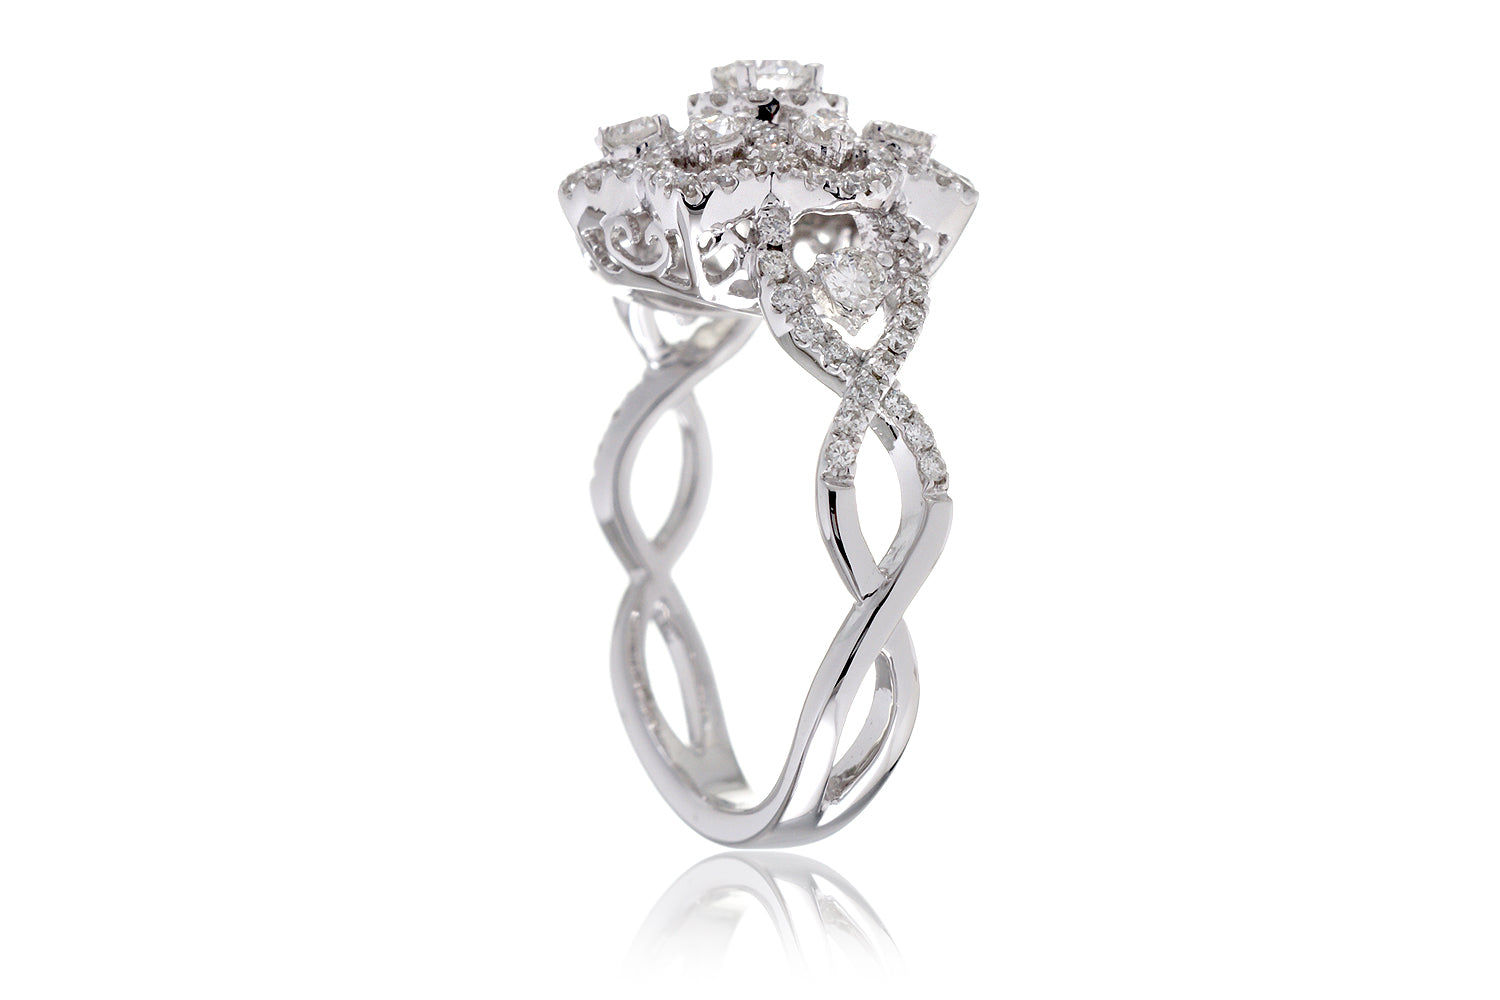 The Snow Flake Diamond Ring With Twist Band